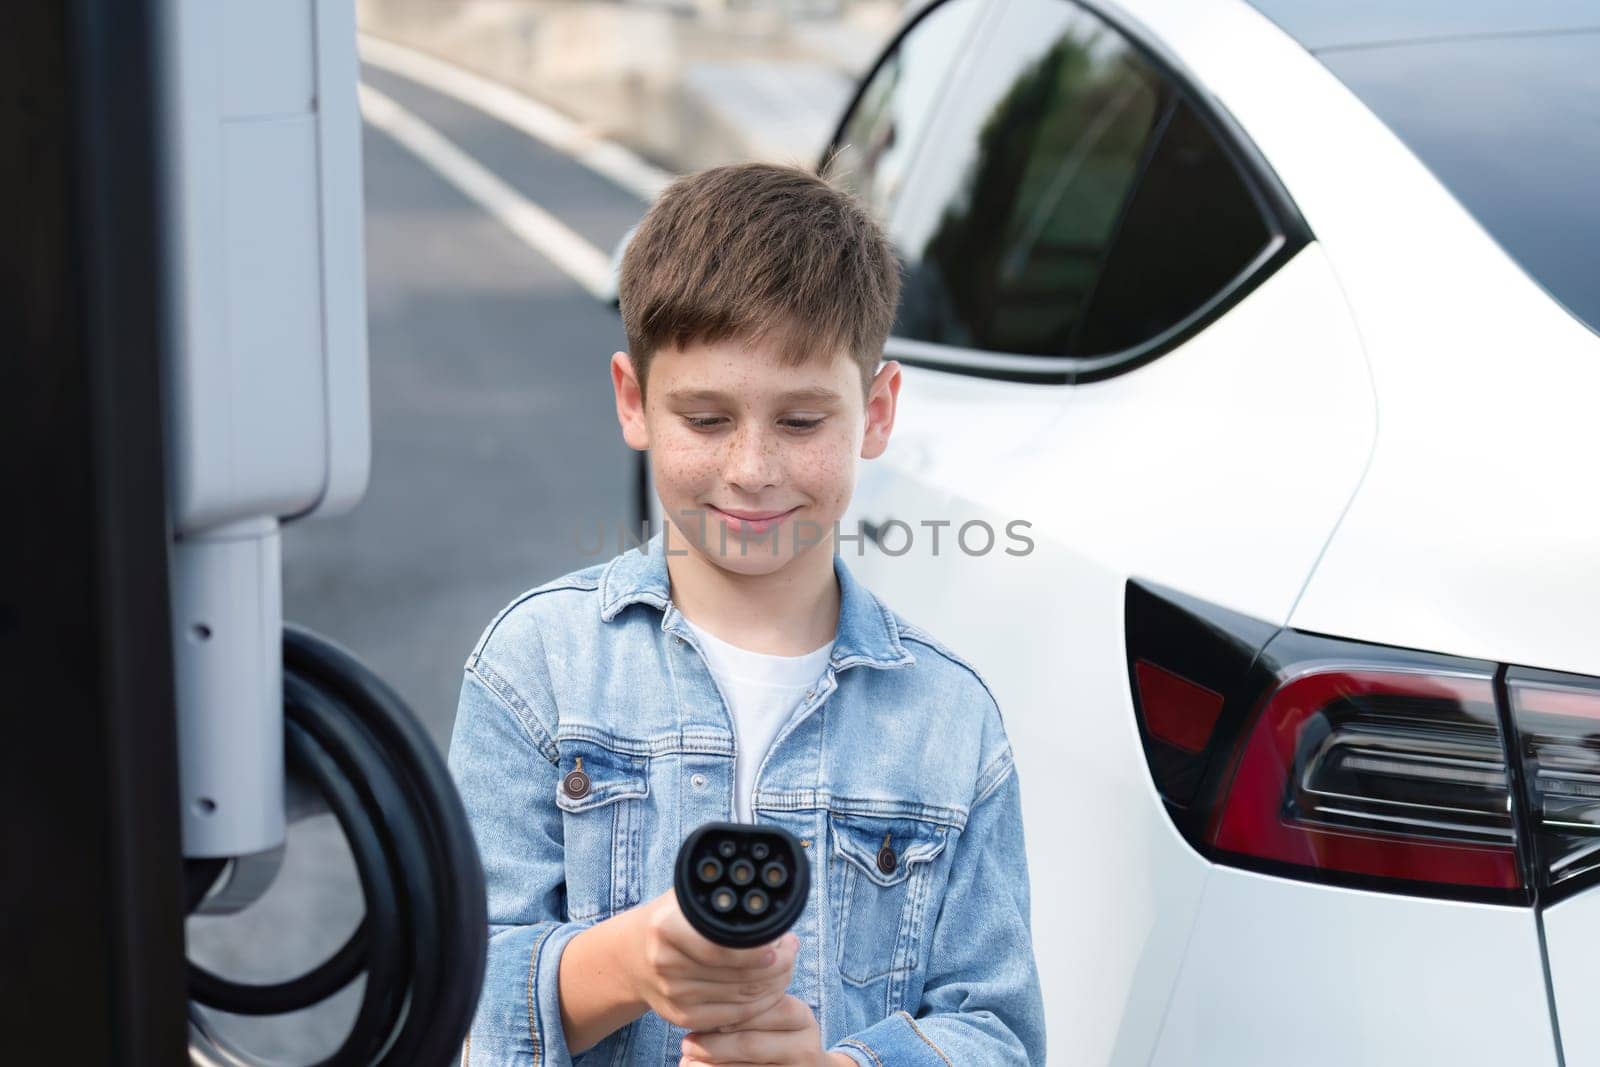 Road trip vacation with eco-friendly EV car and little boy pointing EV charger at camera. Electric vehicle and charging station using clean and sustainable energy for environment protection. Perpetual